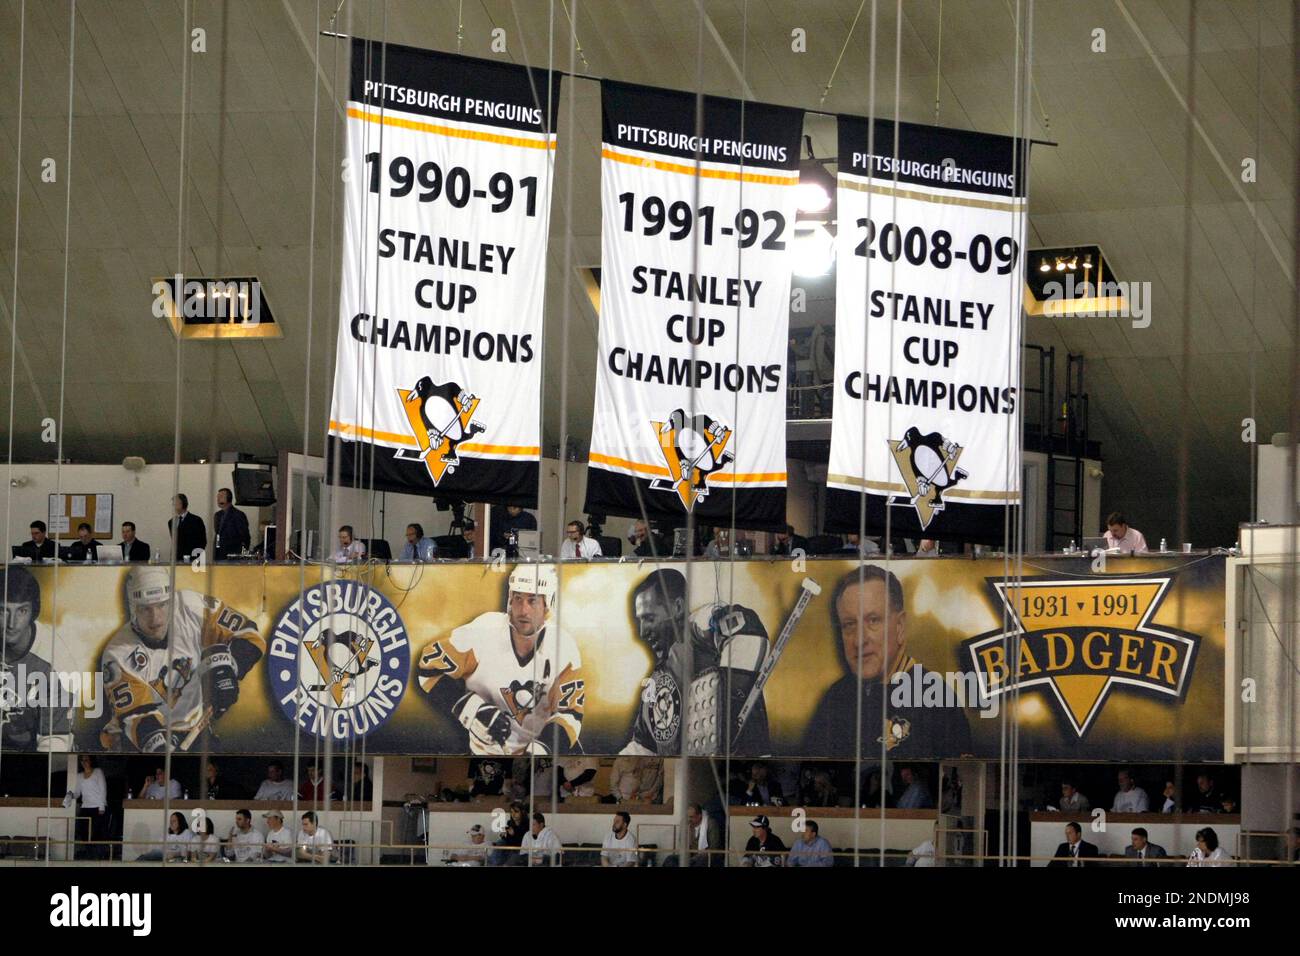 There are Three Stanley Cups